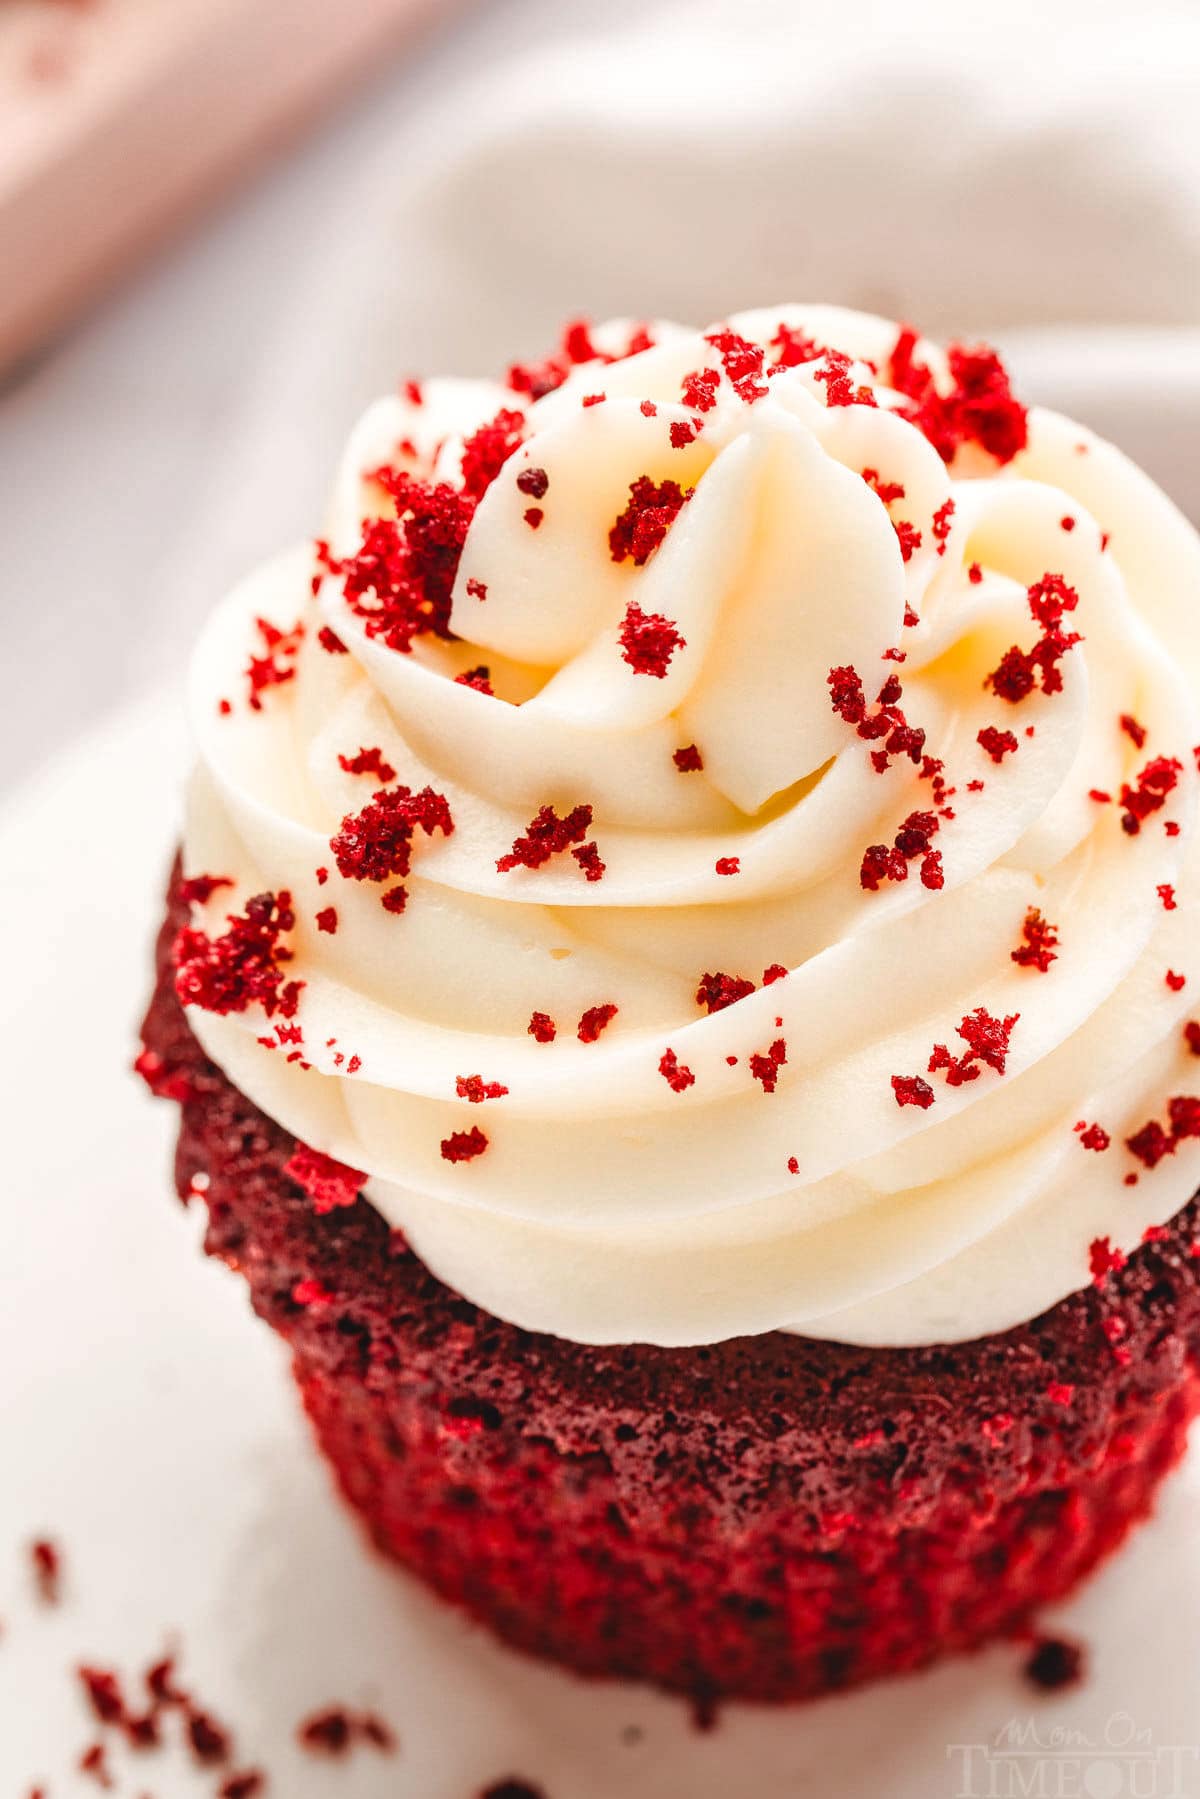 top down close up look at creamy creamy cheese frosting on a red velvet cupcake on white plate. red velvet crumbs have been sprinkled on top of the frosting.